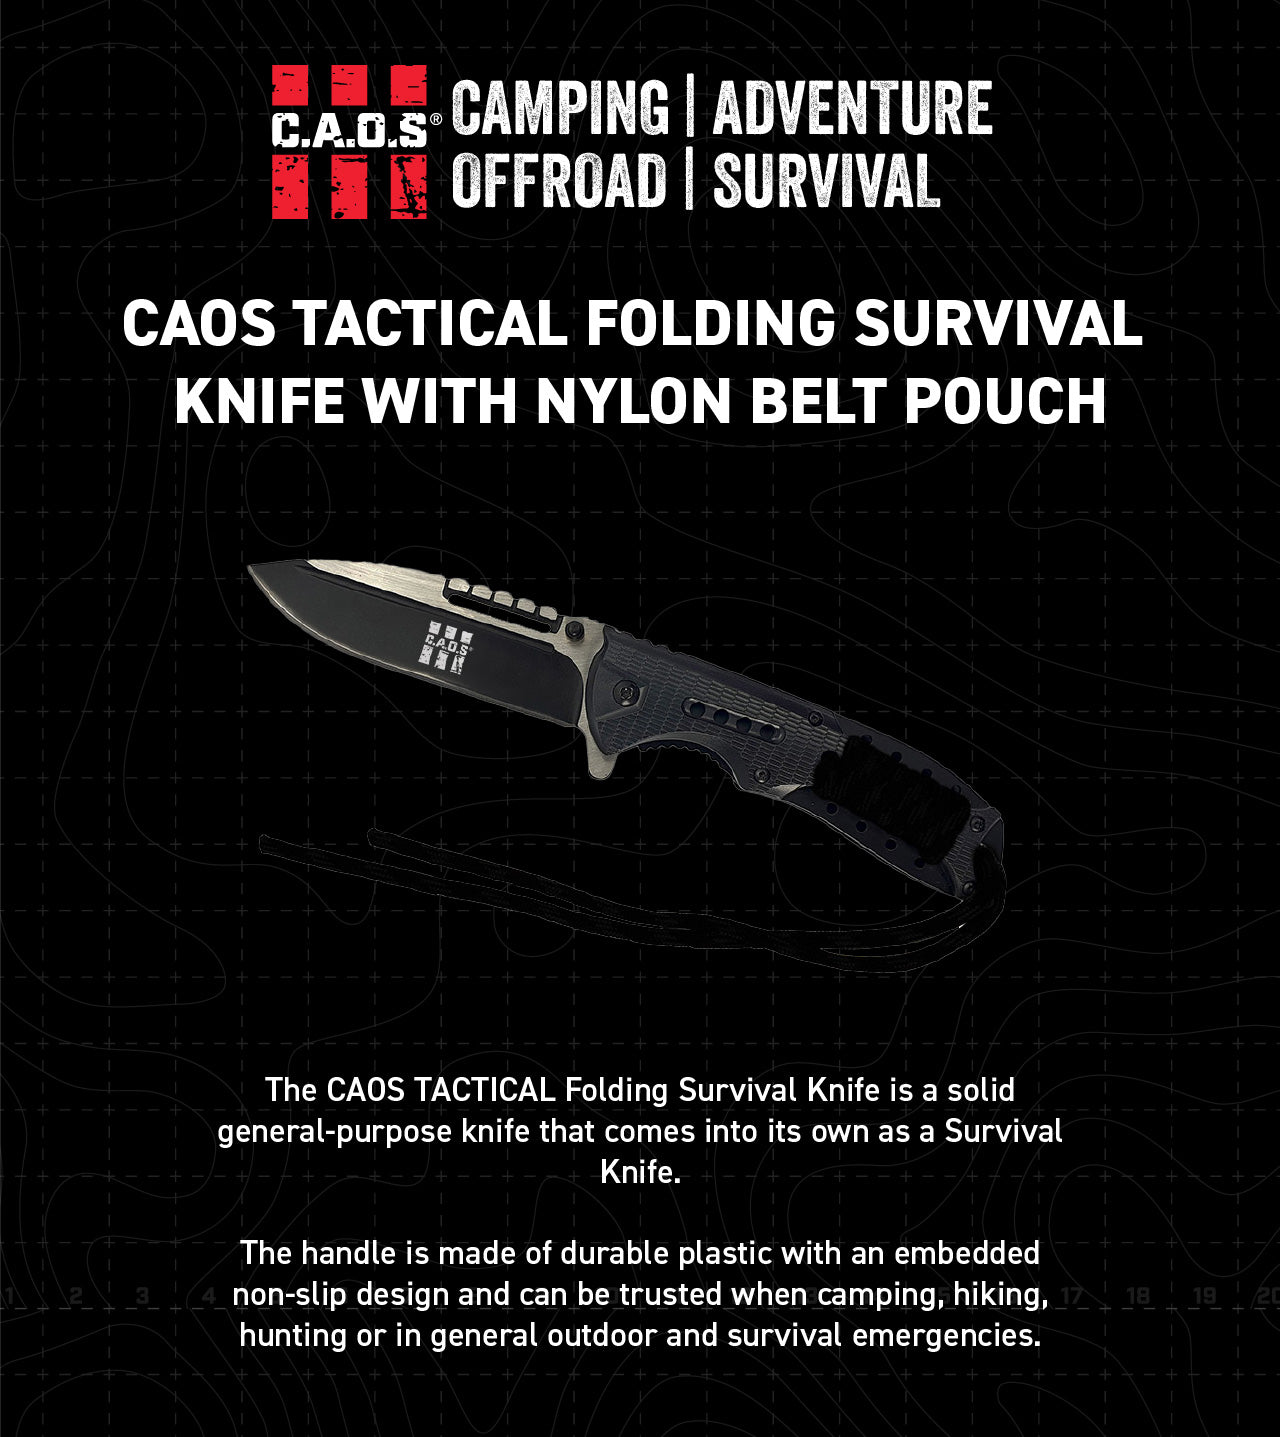 The CAOS TACTICAL Folding Survival Knife is a solid general-purpose knife that comes into its own as a Survival Knife. The handle is made of durable plastic with an embedded non-slip design and can be trusted when camping, hiking, hunting or in general outdoor and survival emergencies.